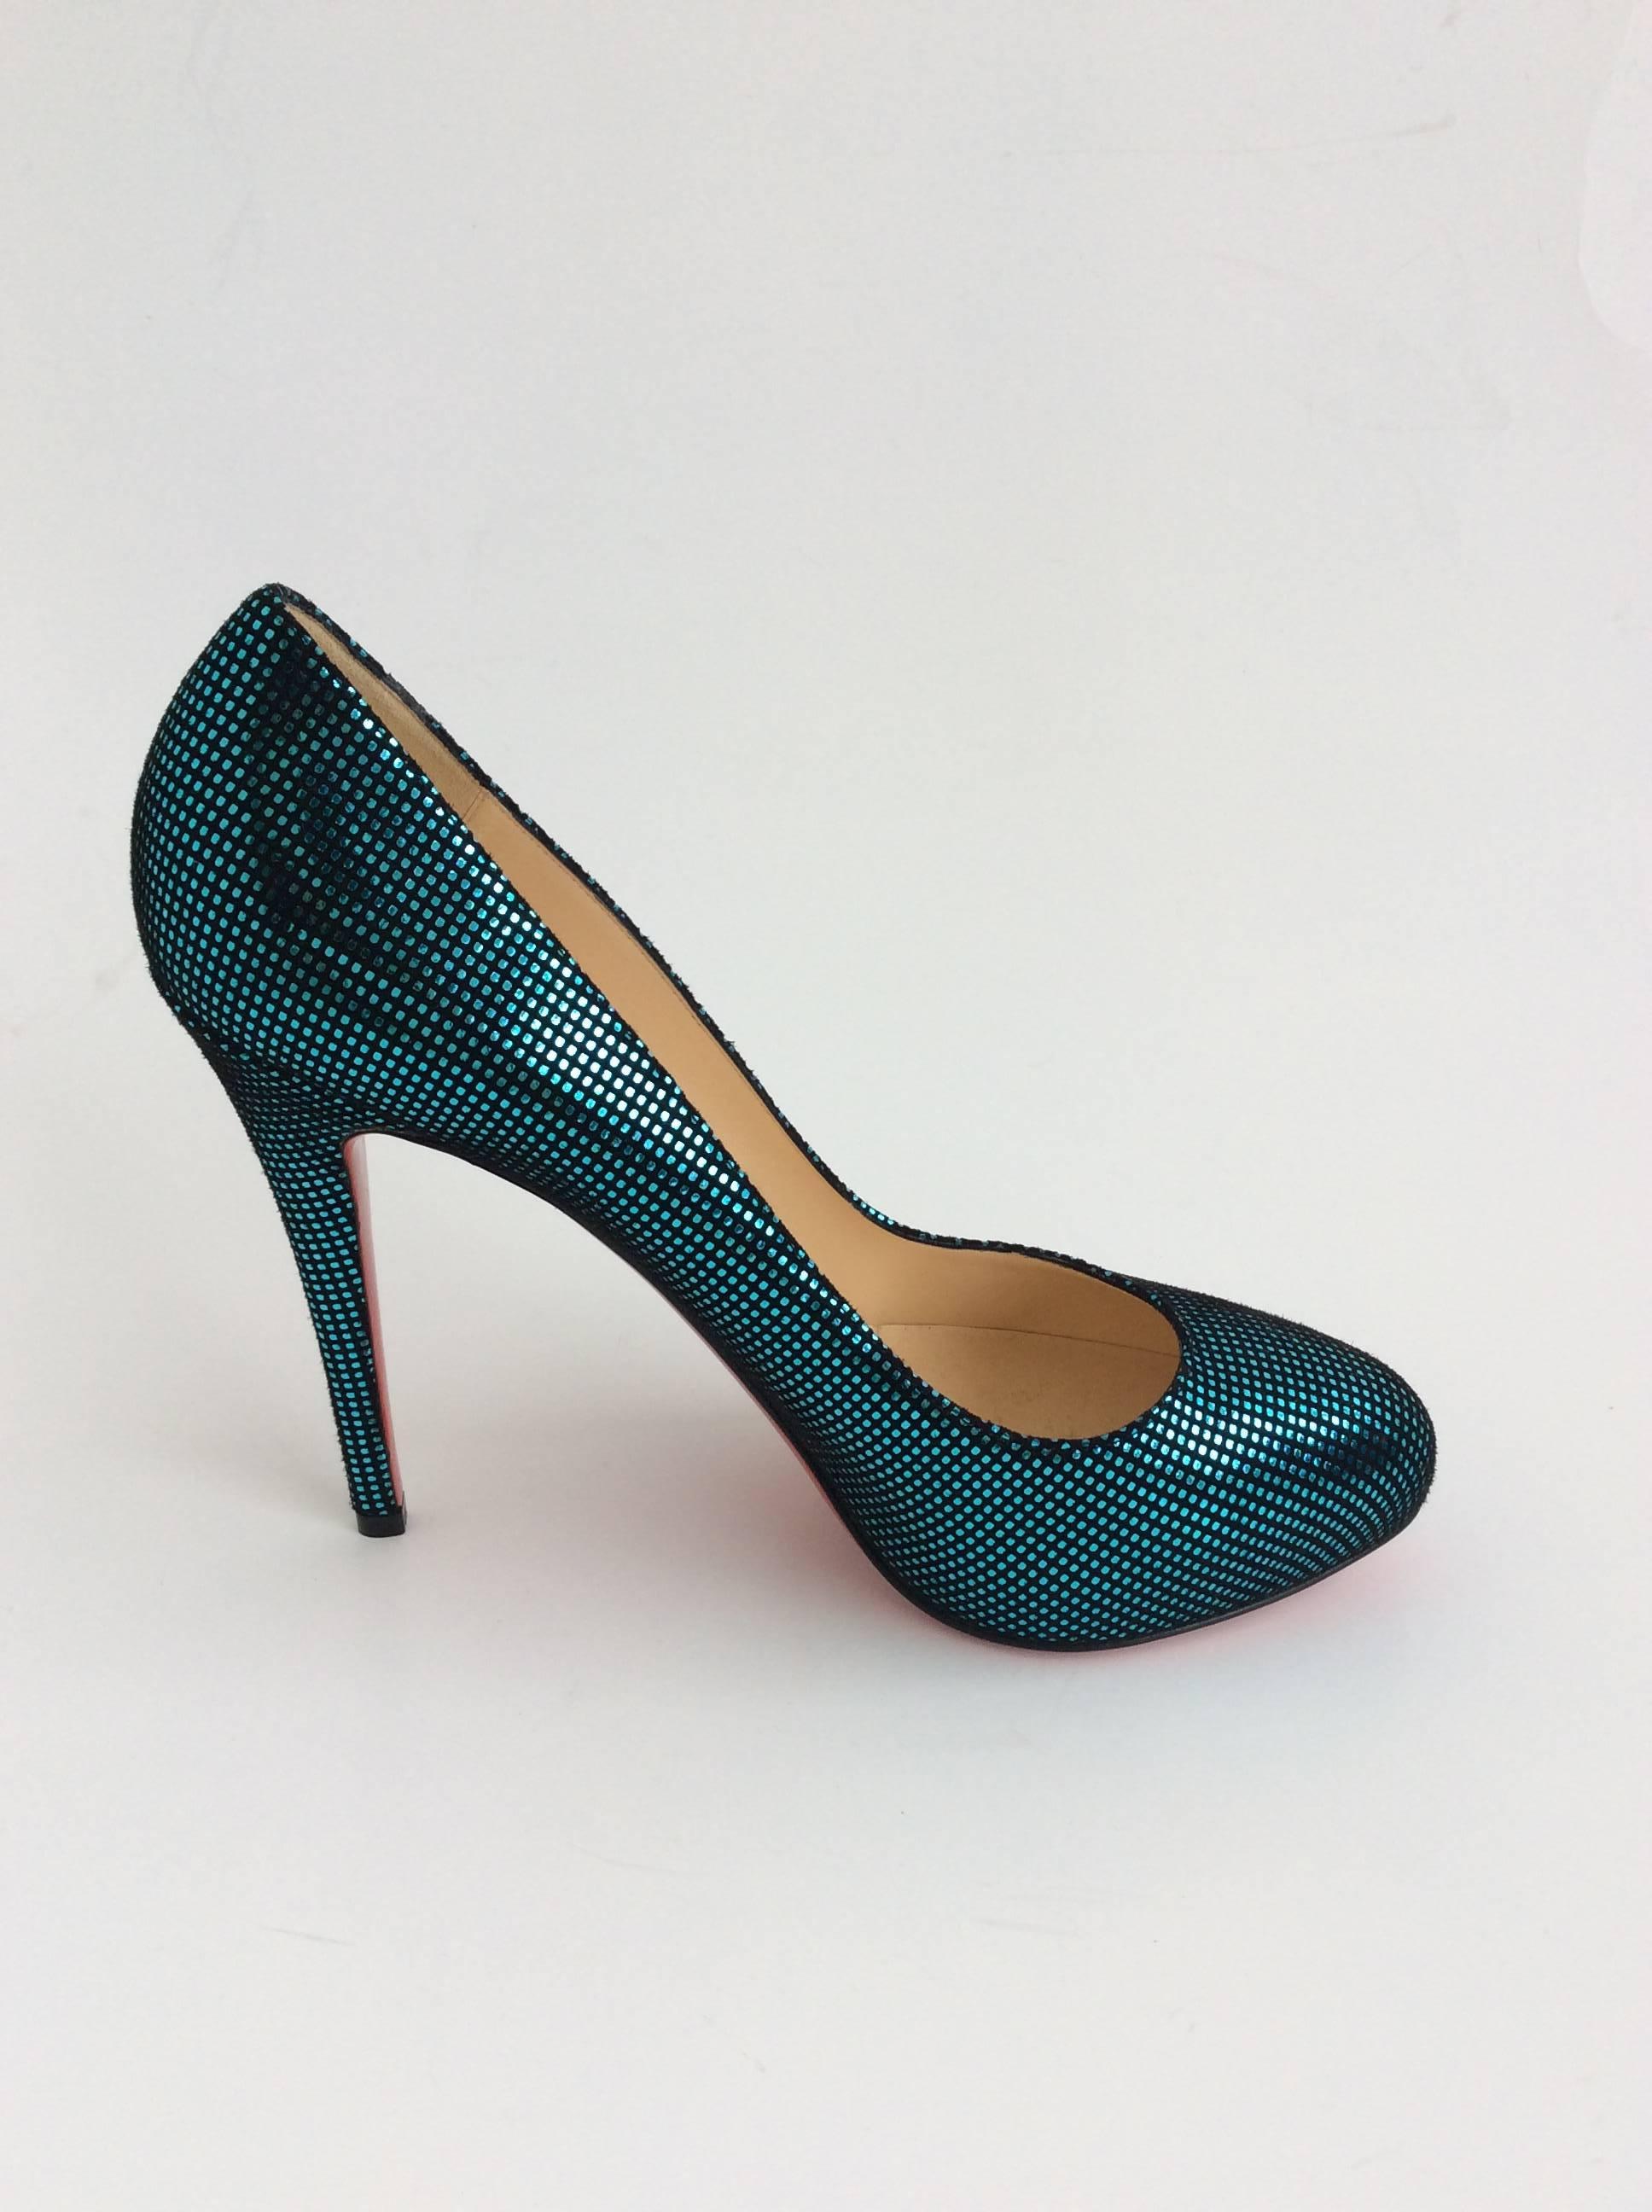 Metallic seafoam green Christian Louboutin platform imprinted suede pumps. Green and black stippling pattern throughout. Covered heel and rounded-toe.

Platform height: 0.75 inches. Heel height: 4.5 inches.

Sizing: 40.5, Us 10.5